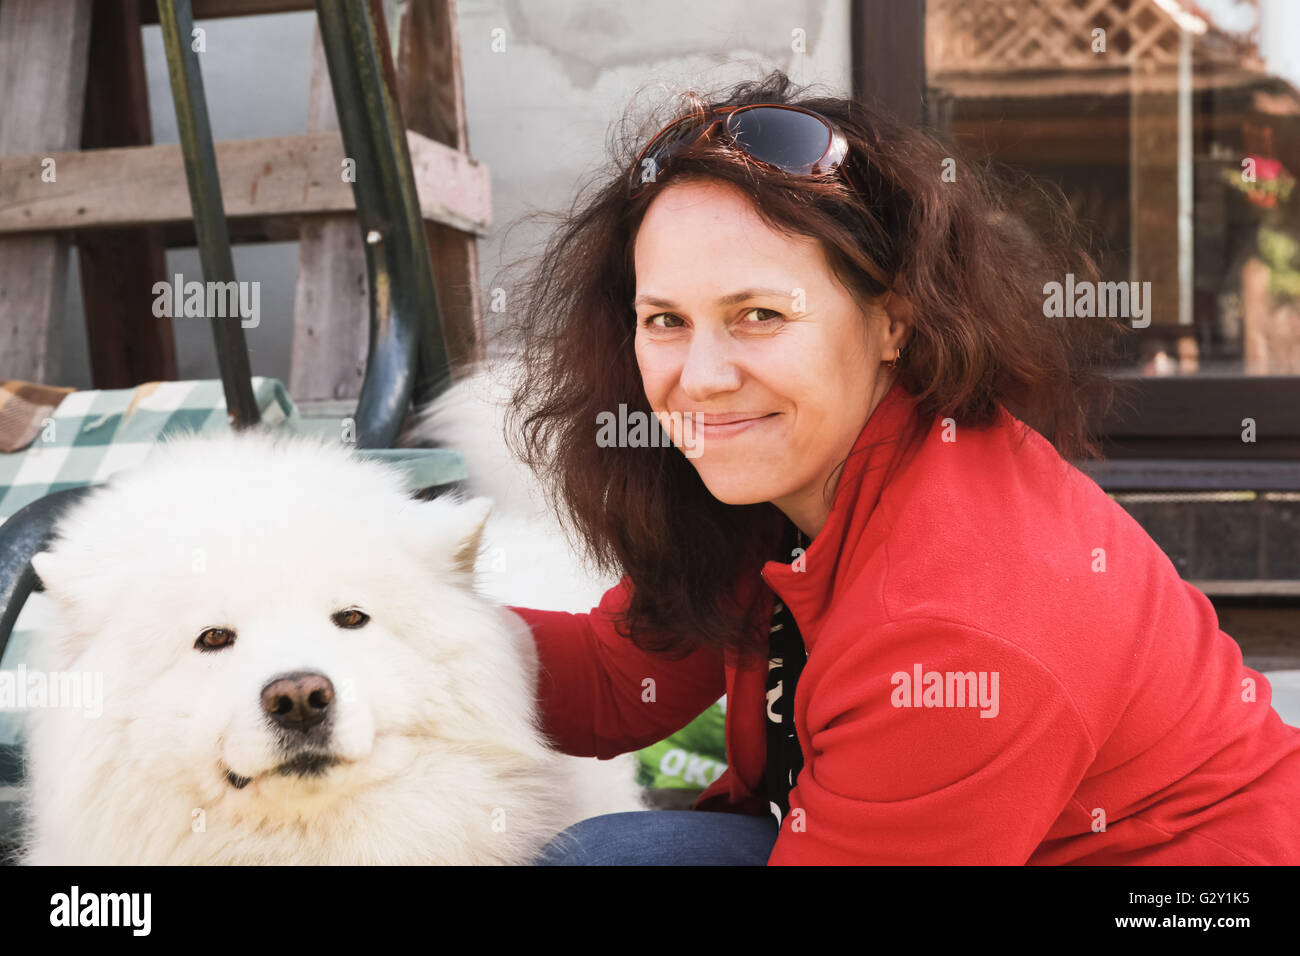 Happy young Caucasian woman with white fluffy Samoyed dog Stock Photo